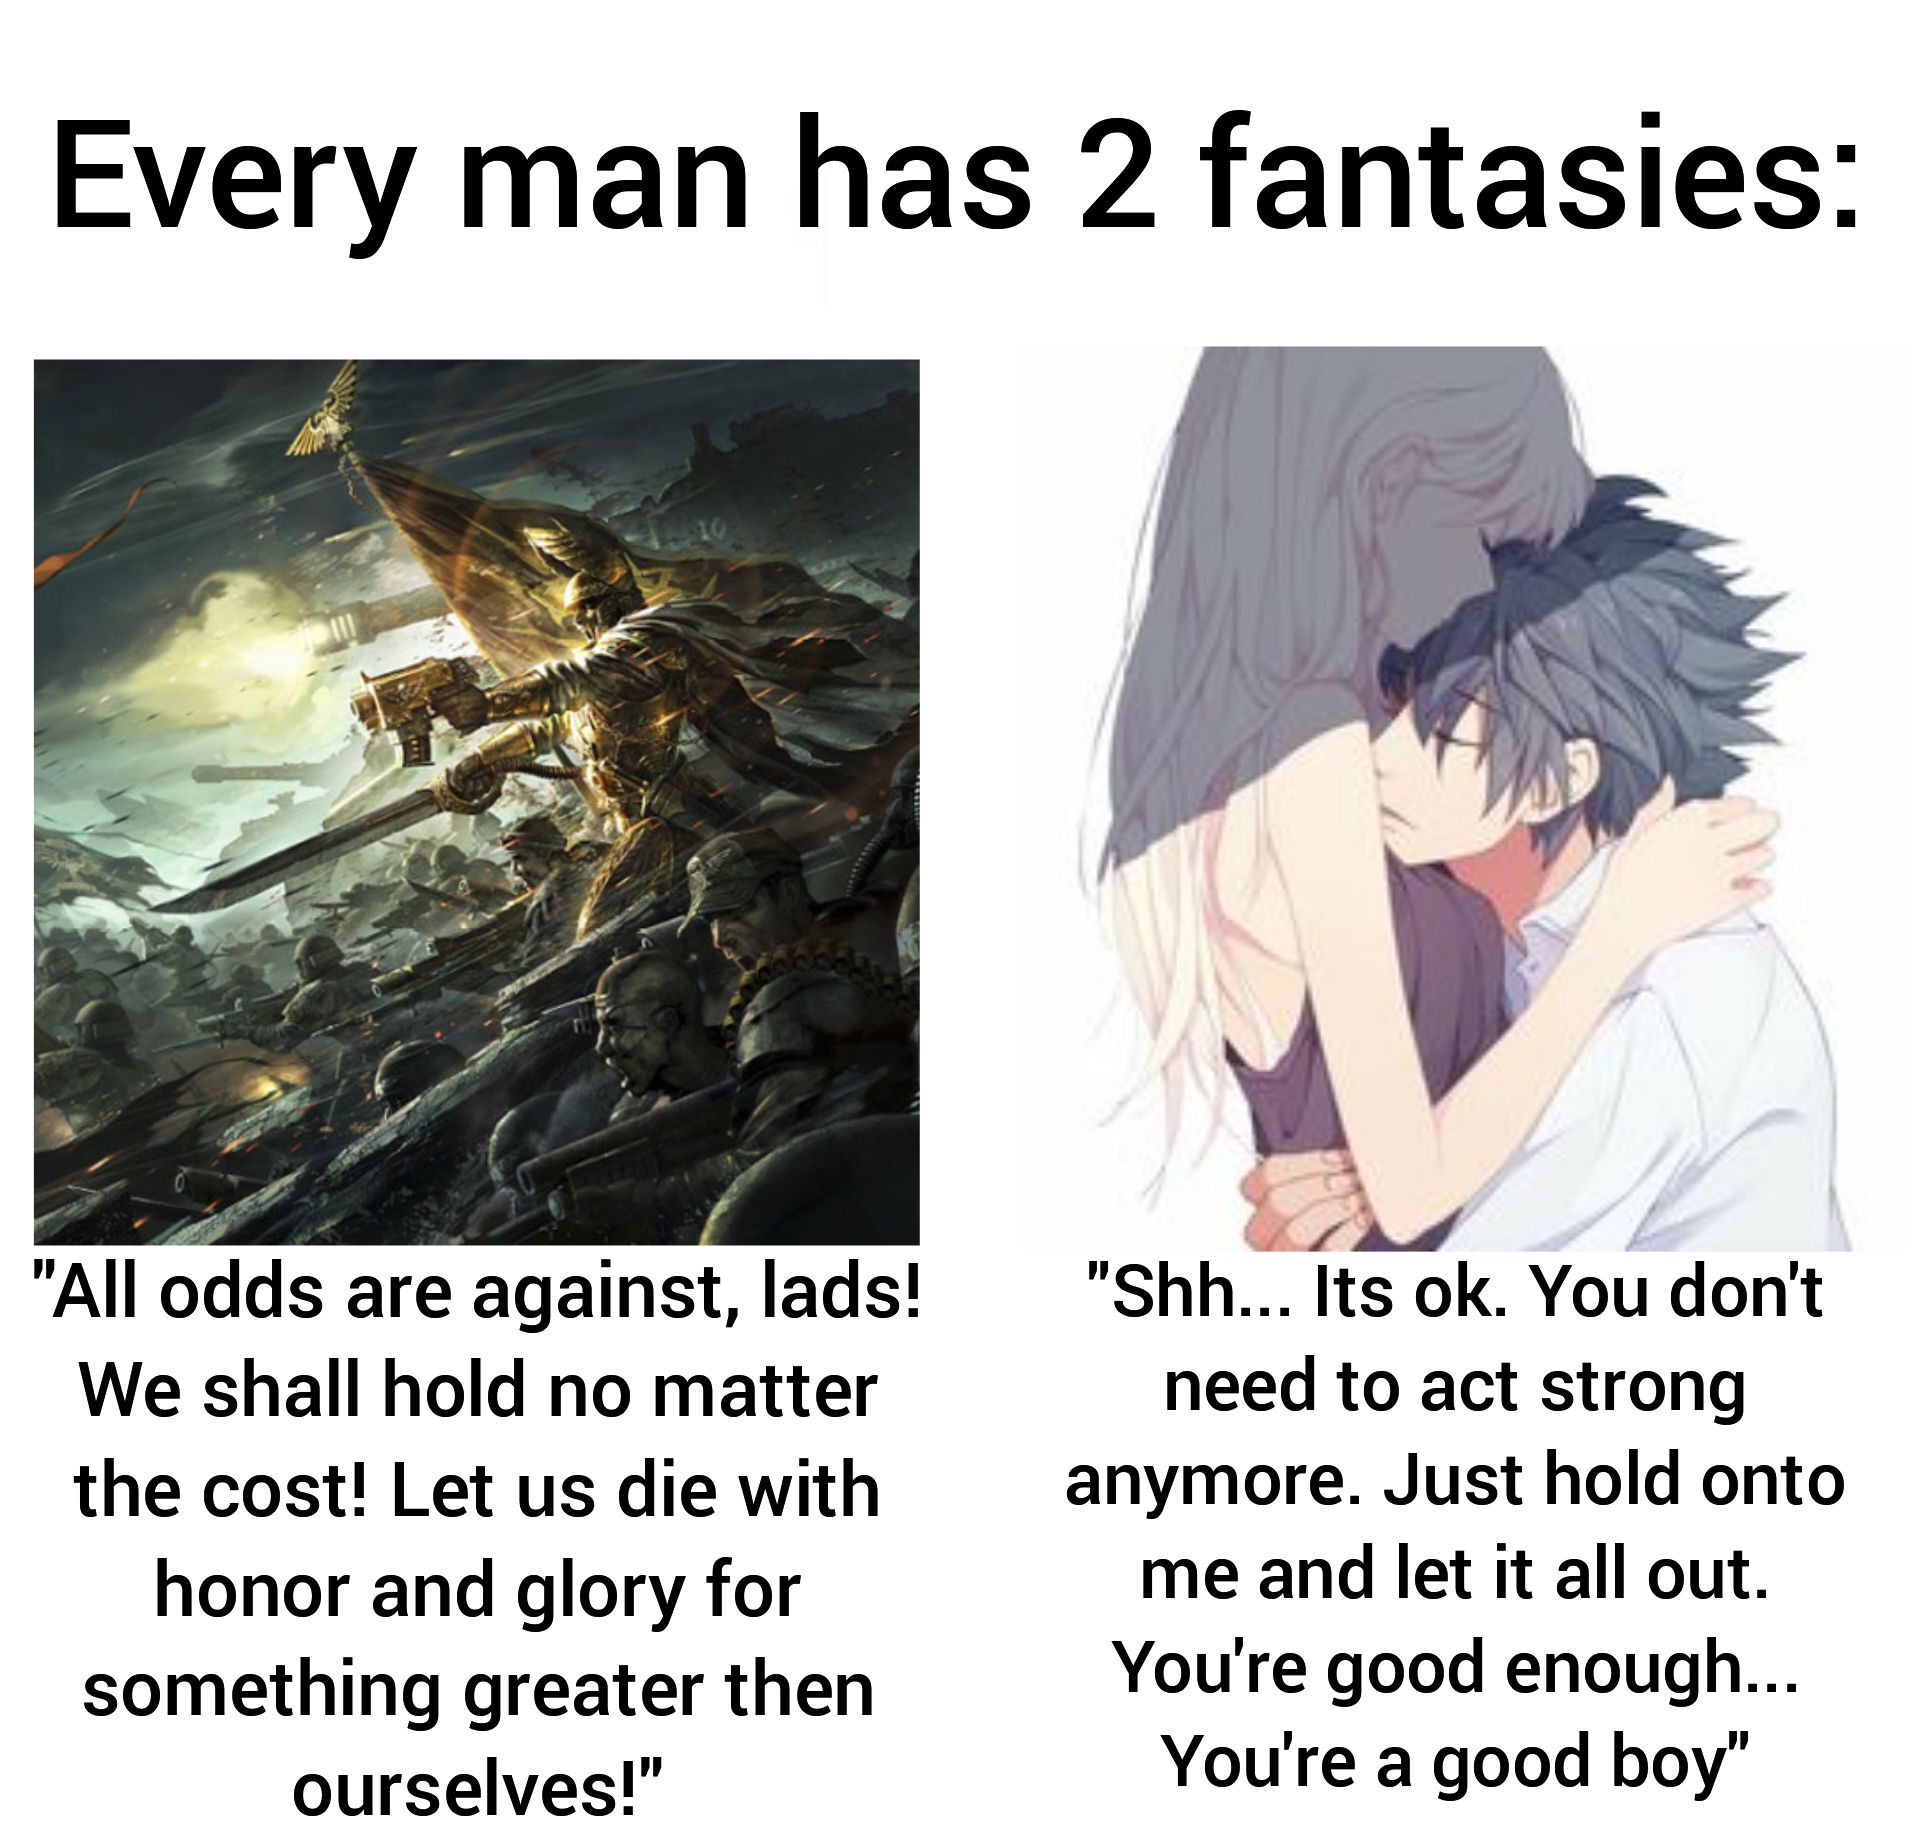 The true male fantasies